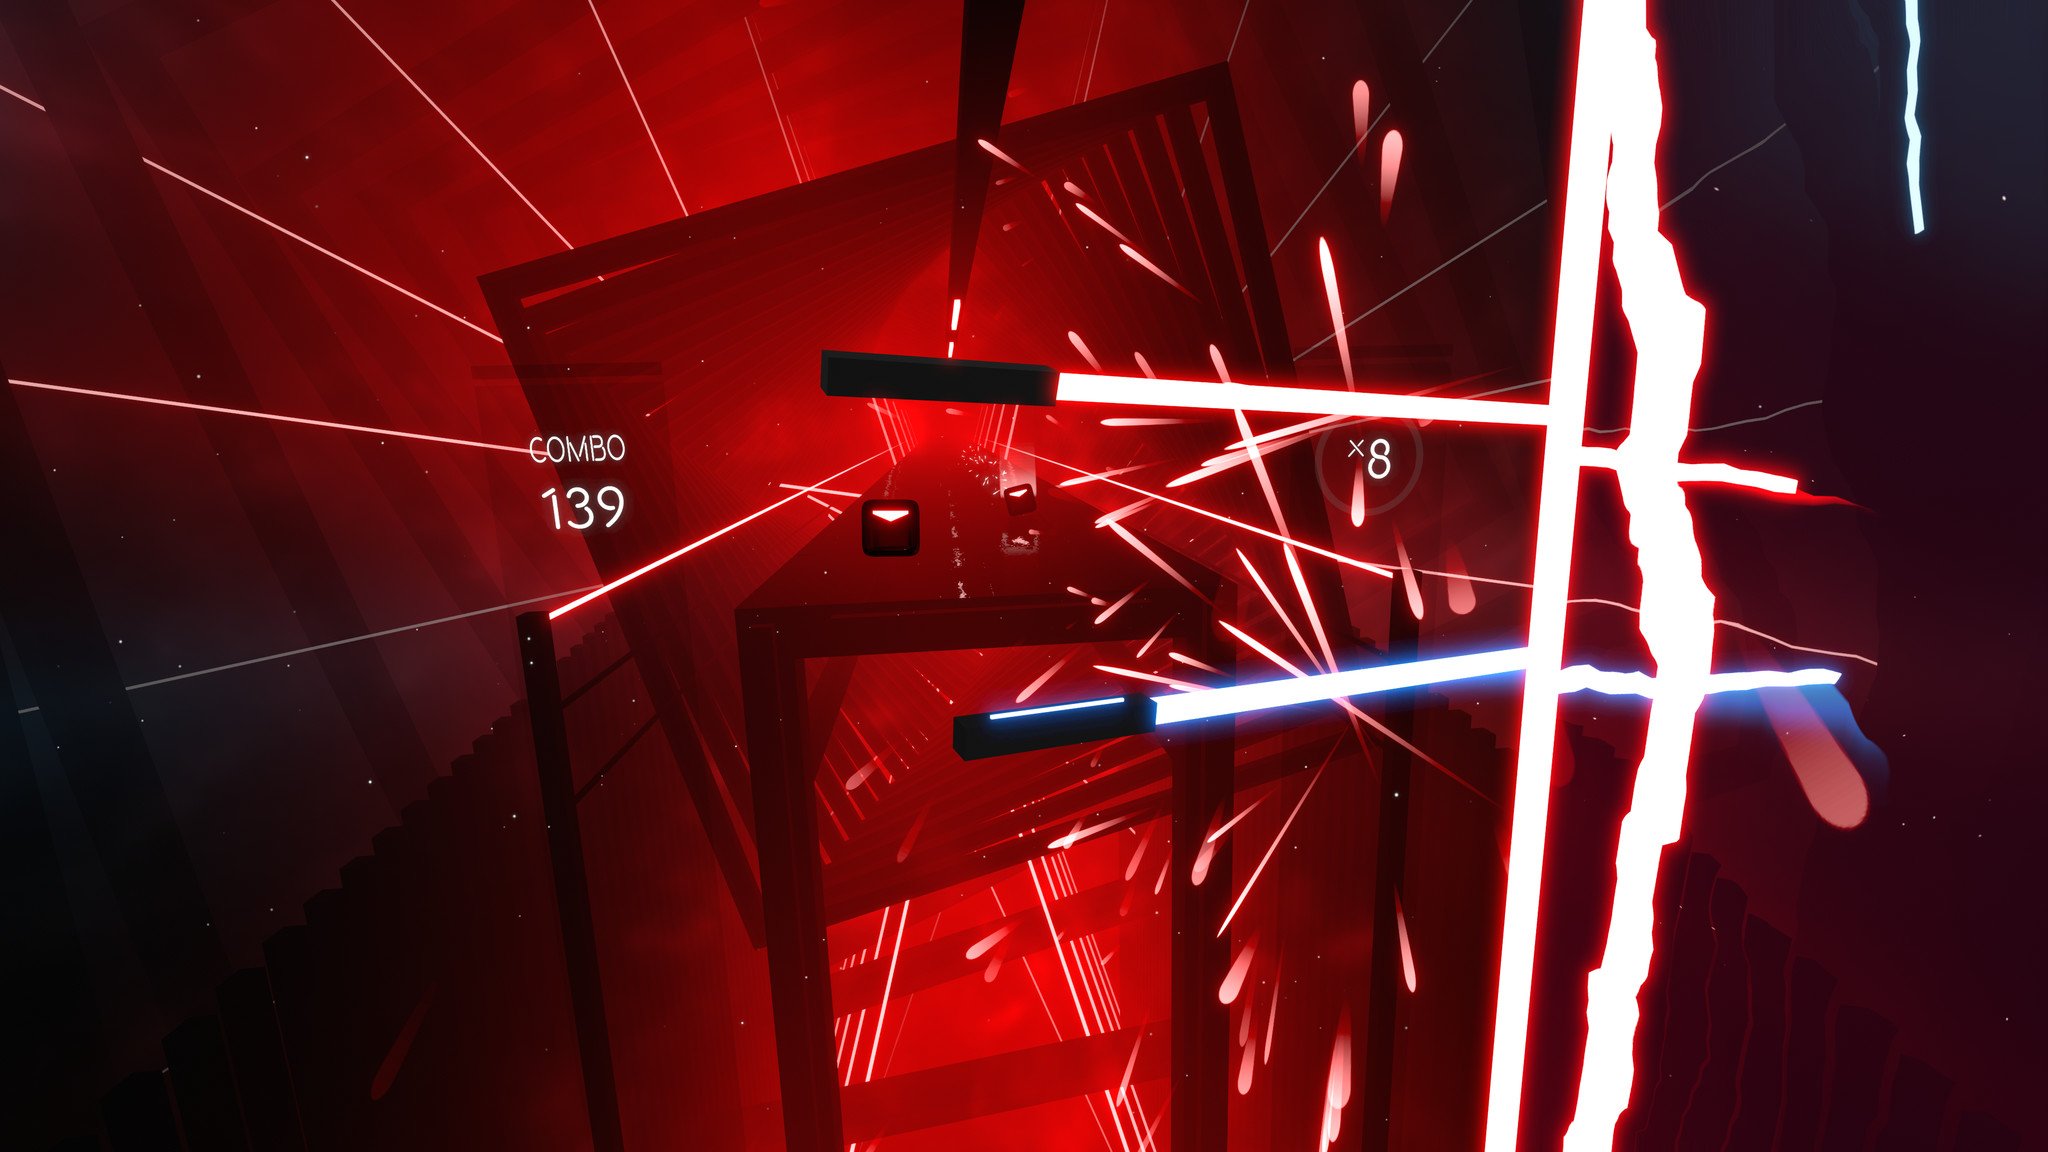 https://www.androidcentral.com/sites/androidcentral.com/files/styles/small/public/article_images/2019/05/beat-saber-quest.jpg?itok=FDE_t23-